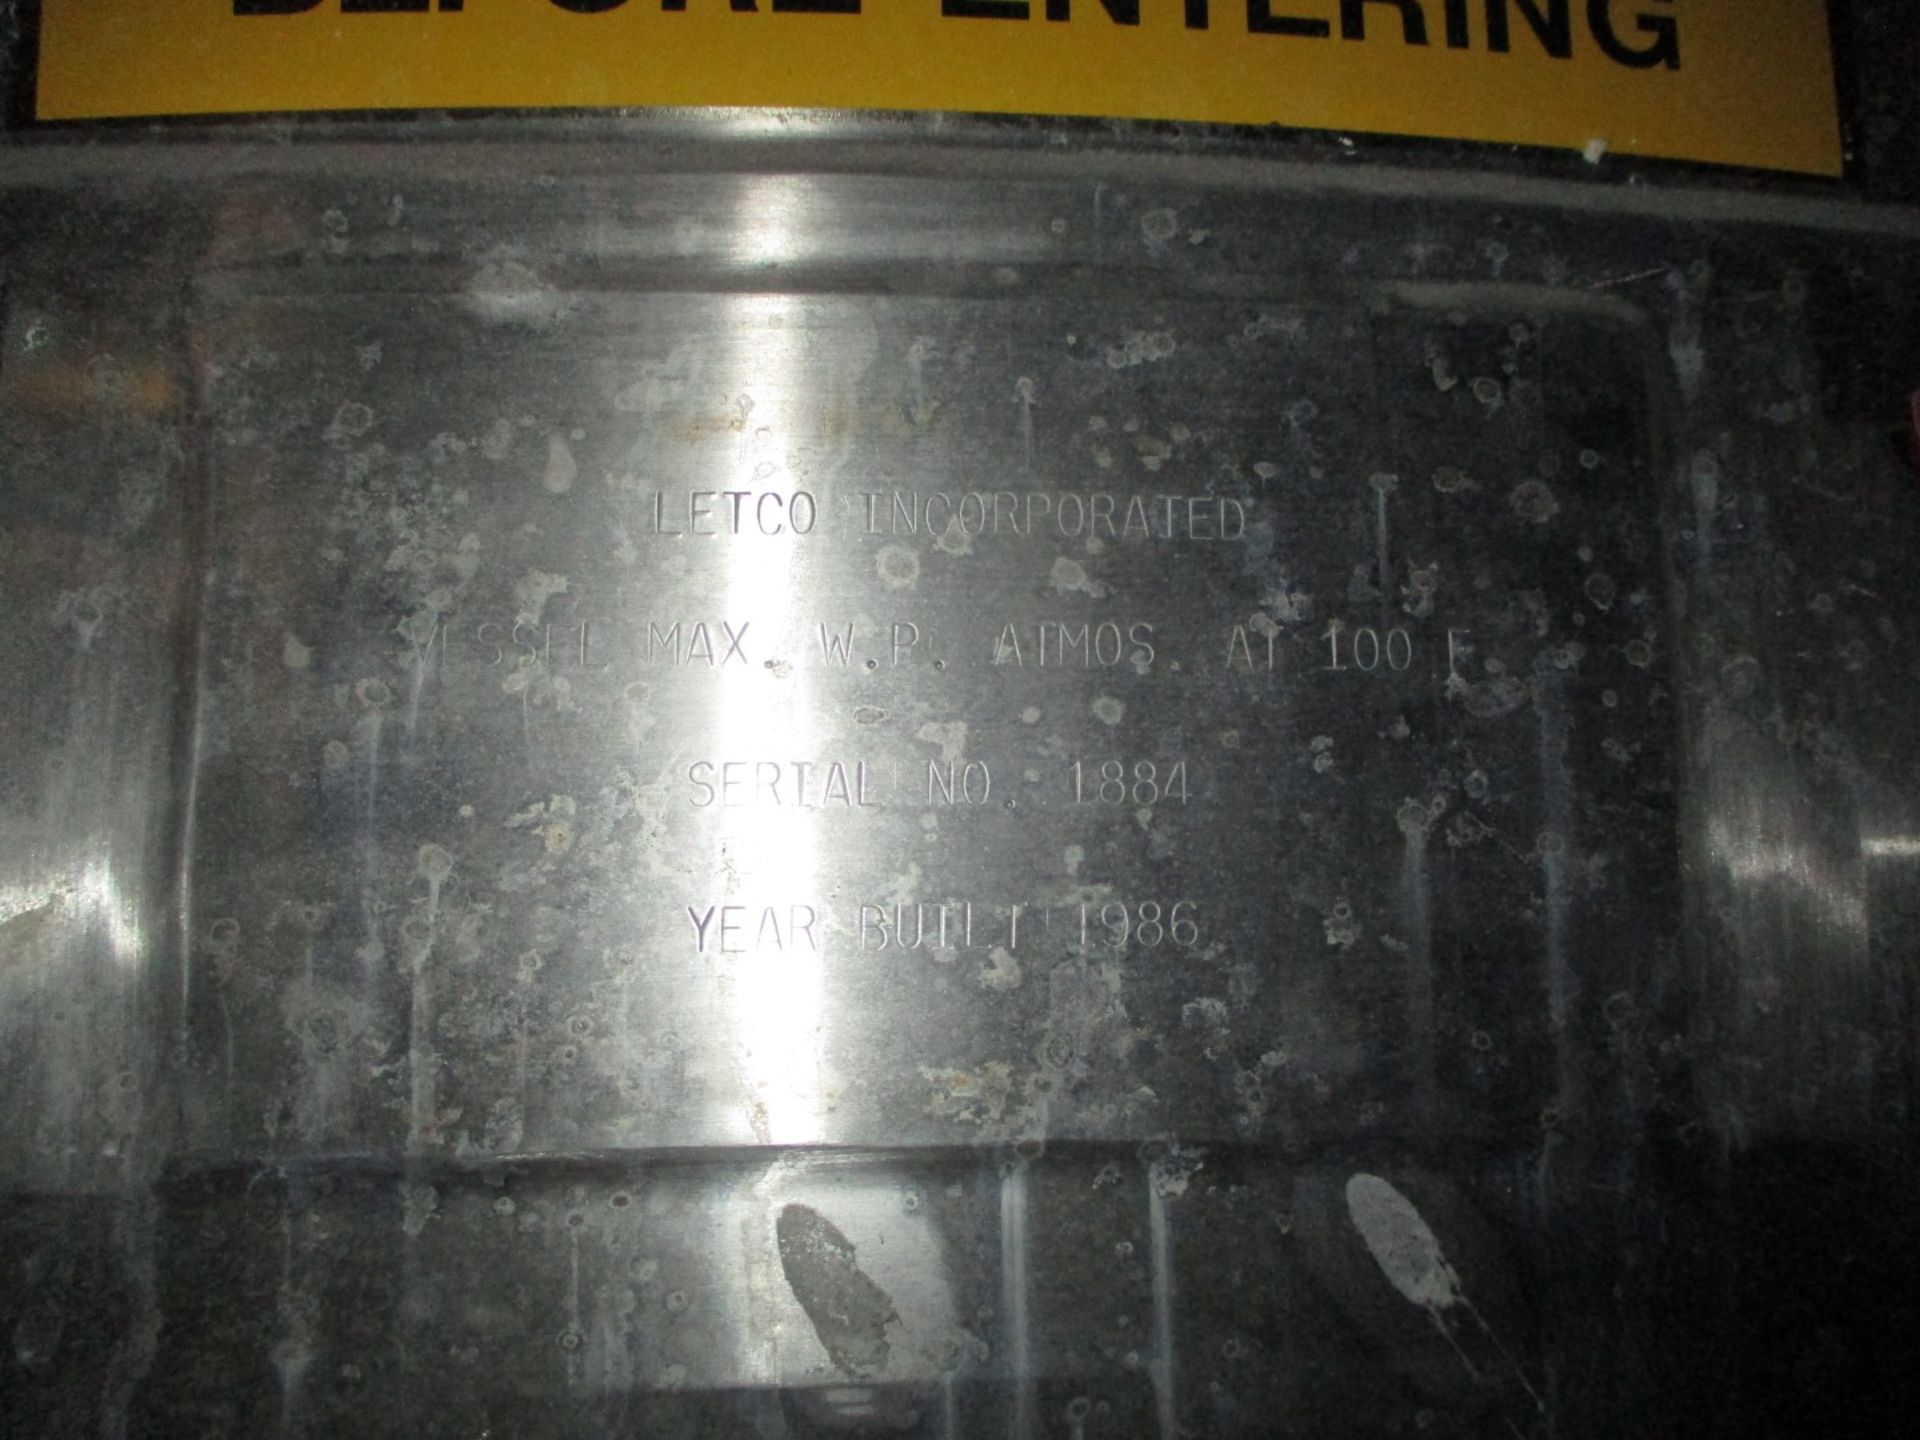 7500 Gallon Letco Tank, Stainless Steel Construction, Approximately 10' Diameter X | Rig Fee $3500 - Image 2 of 5